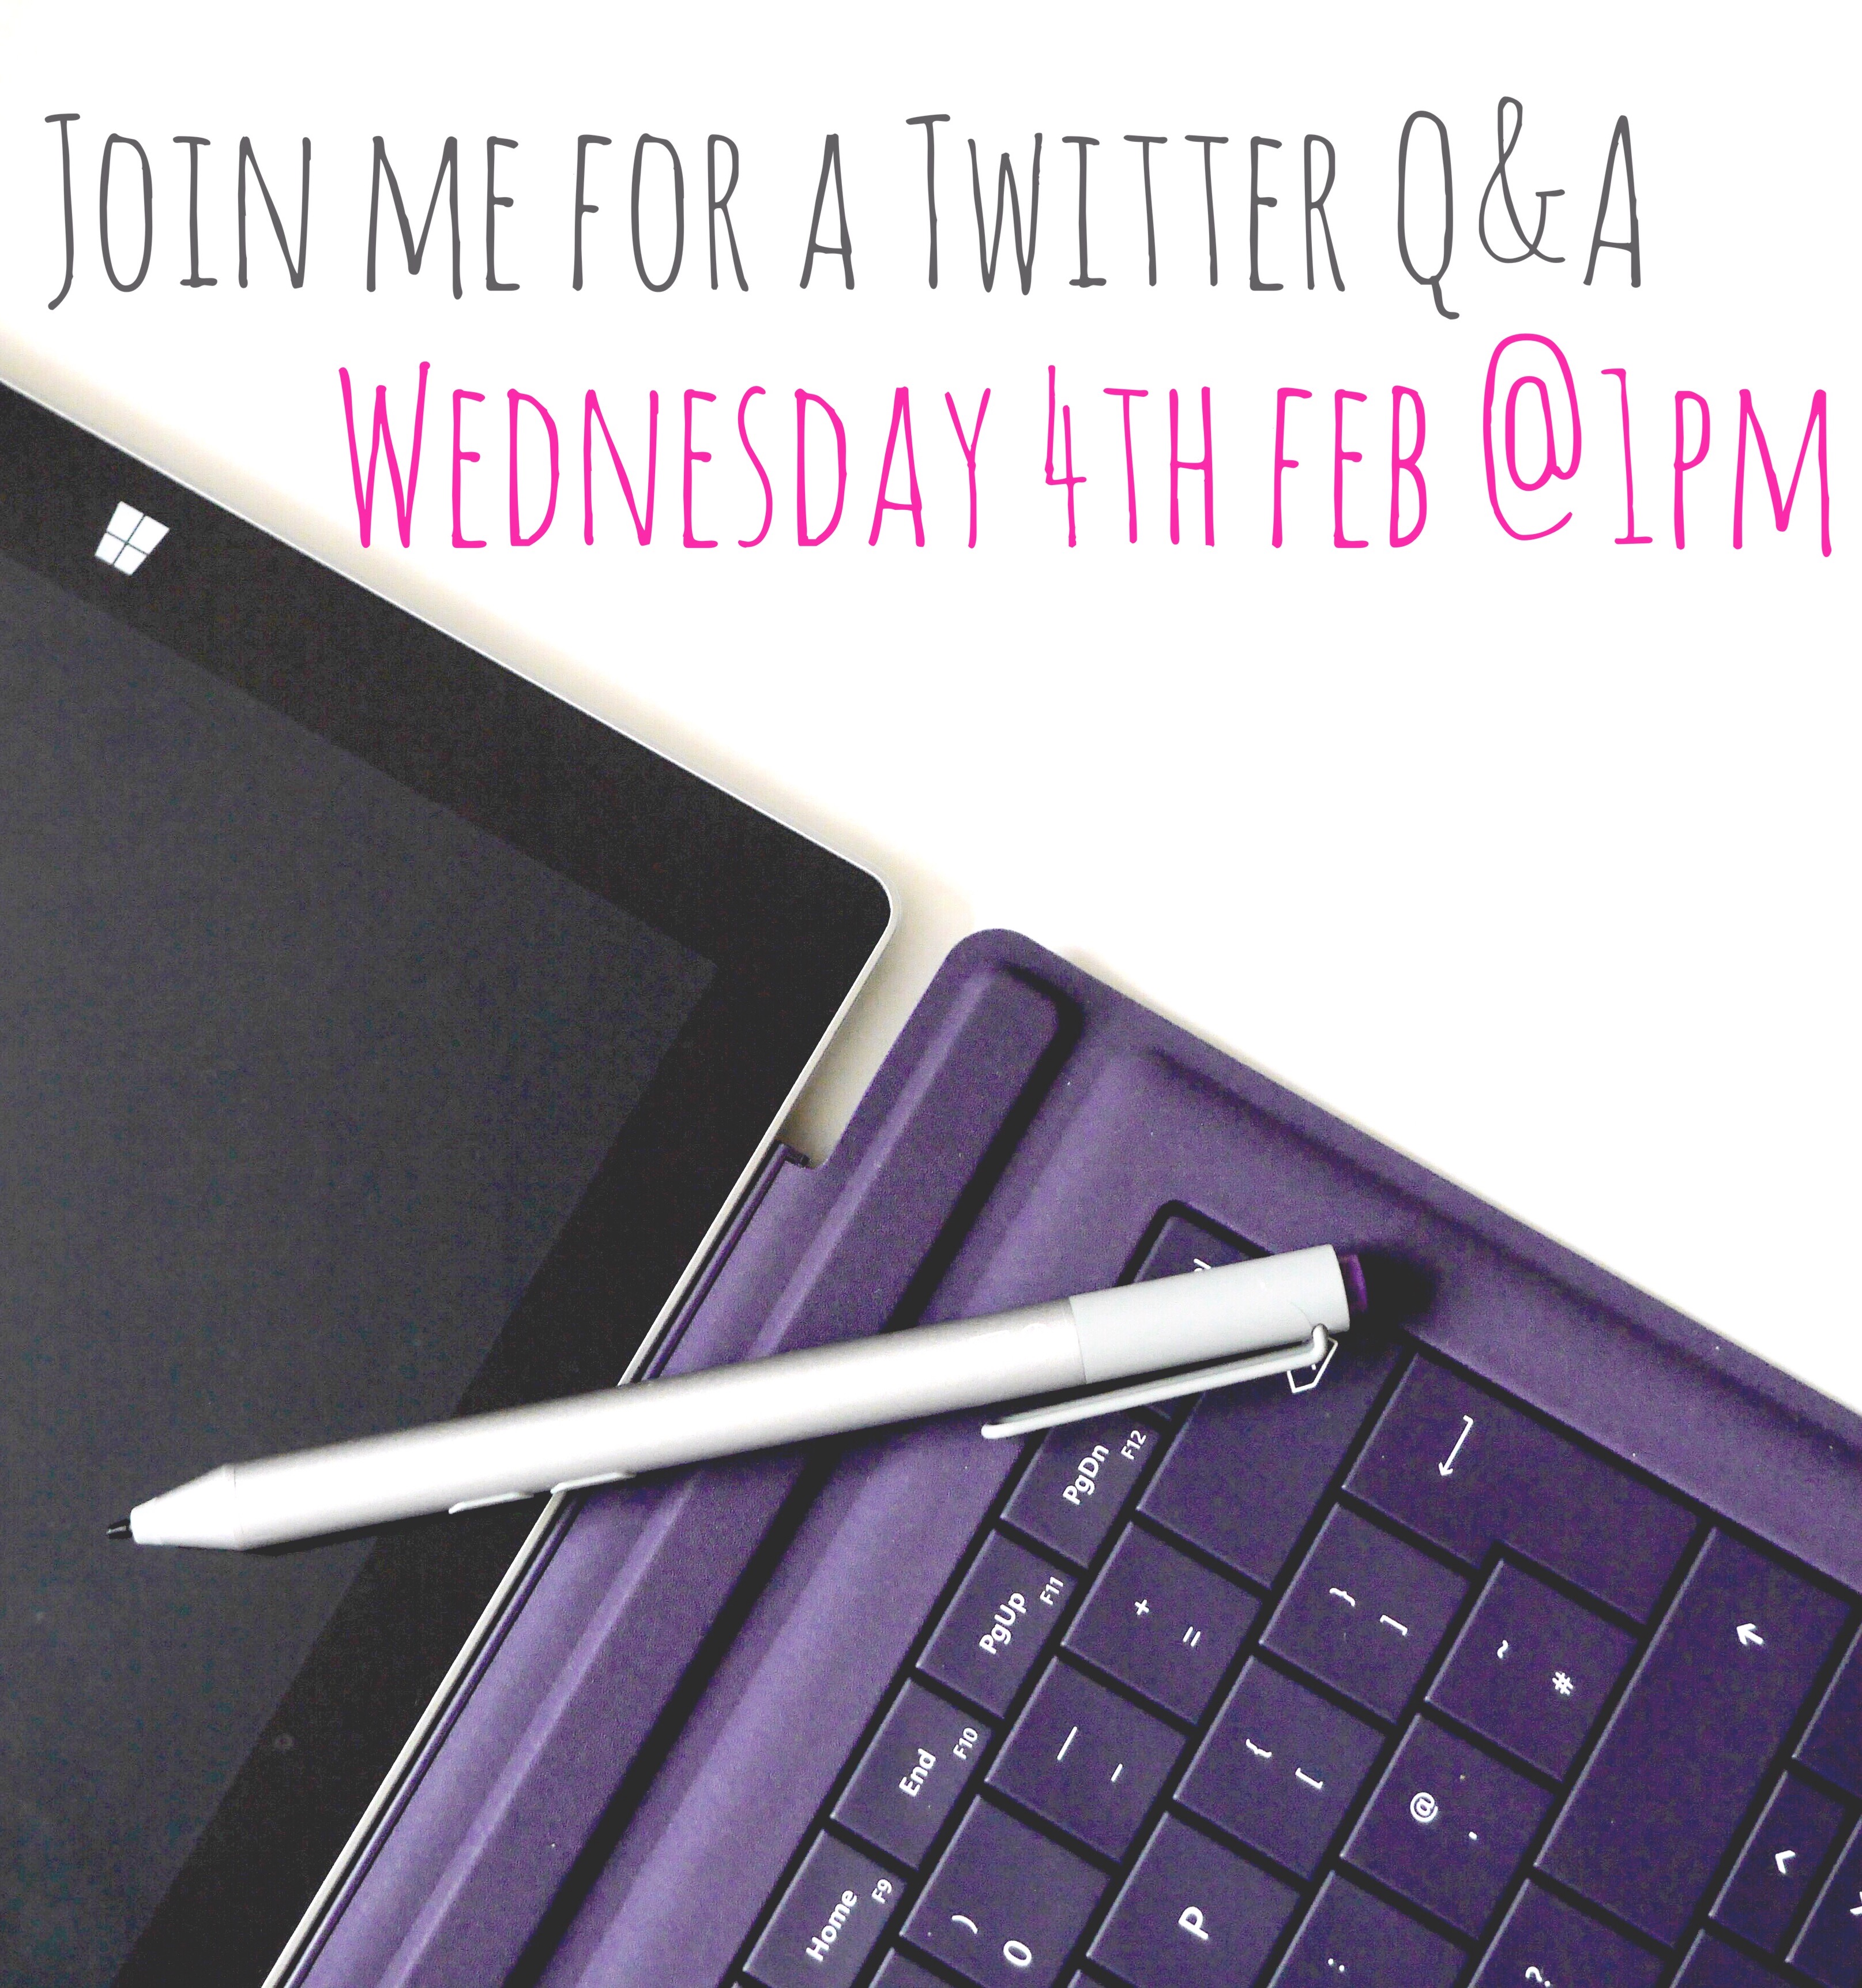 Join me for a Twitter Q&A